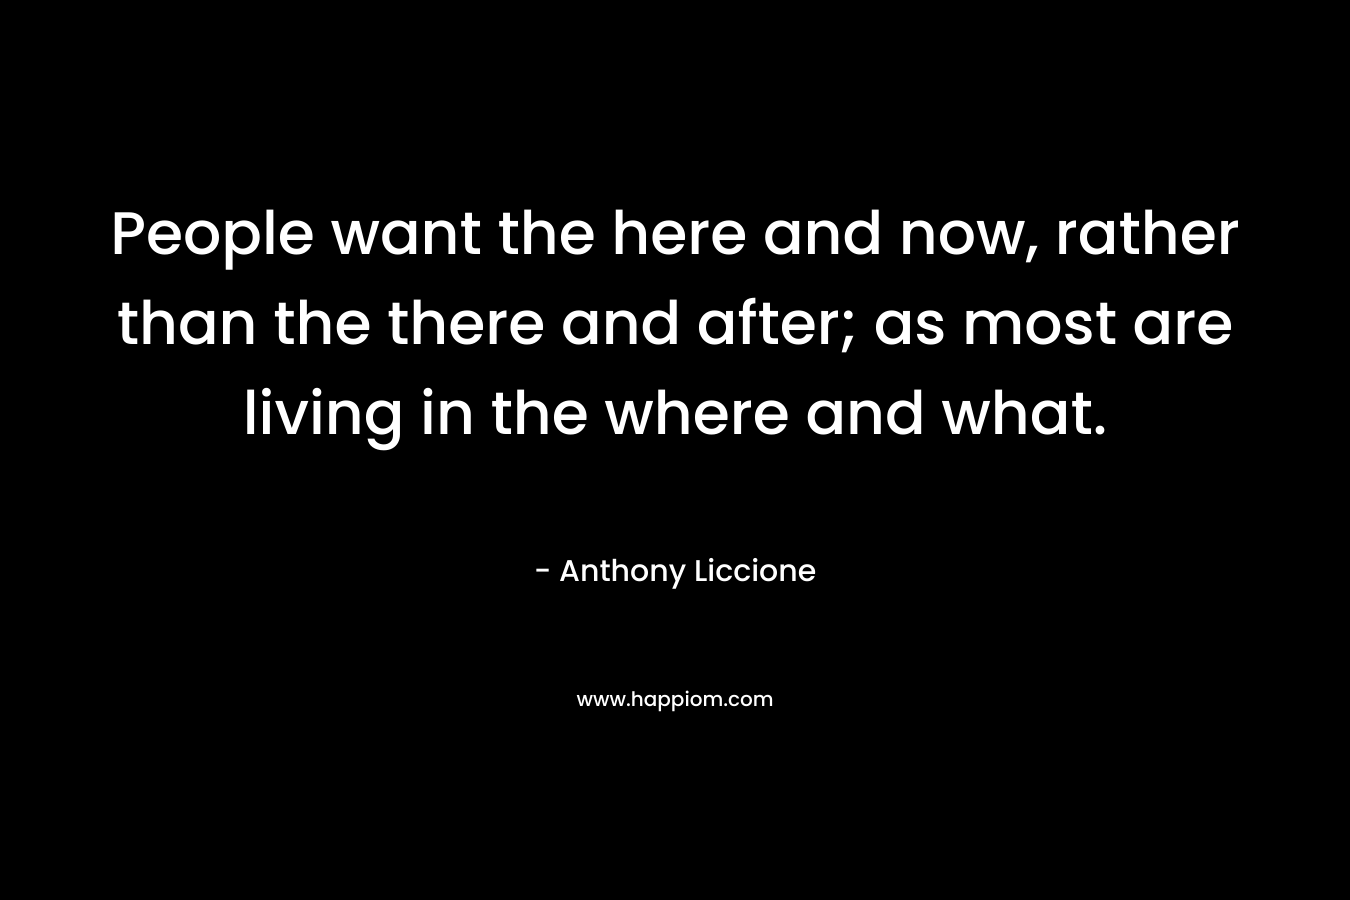 People want the here and now, rather than the there and after; as most are living in the where and what.